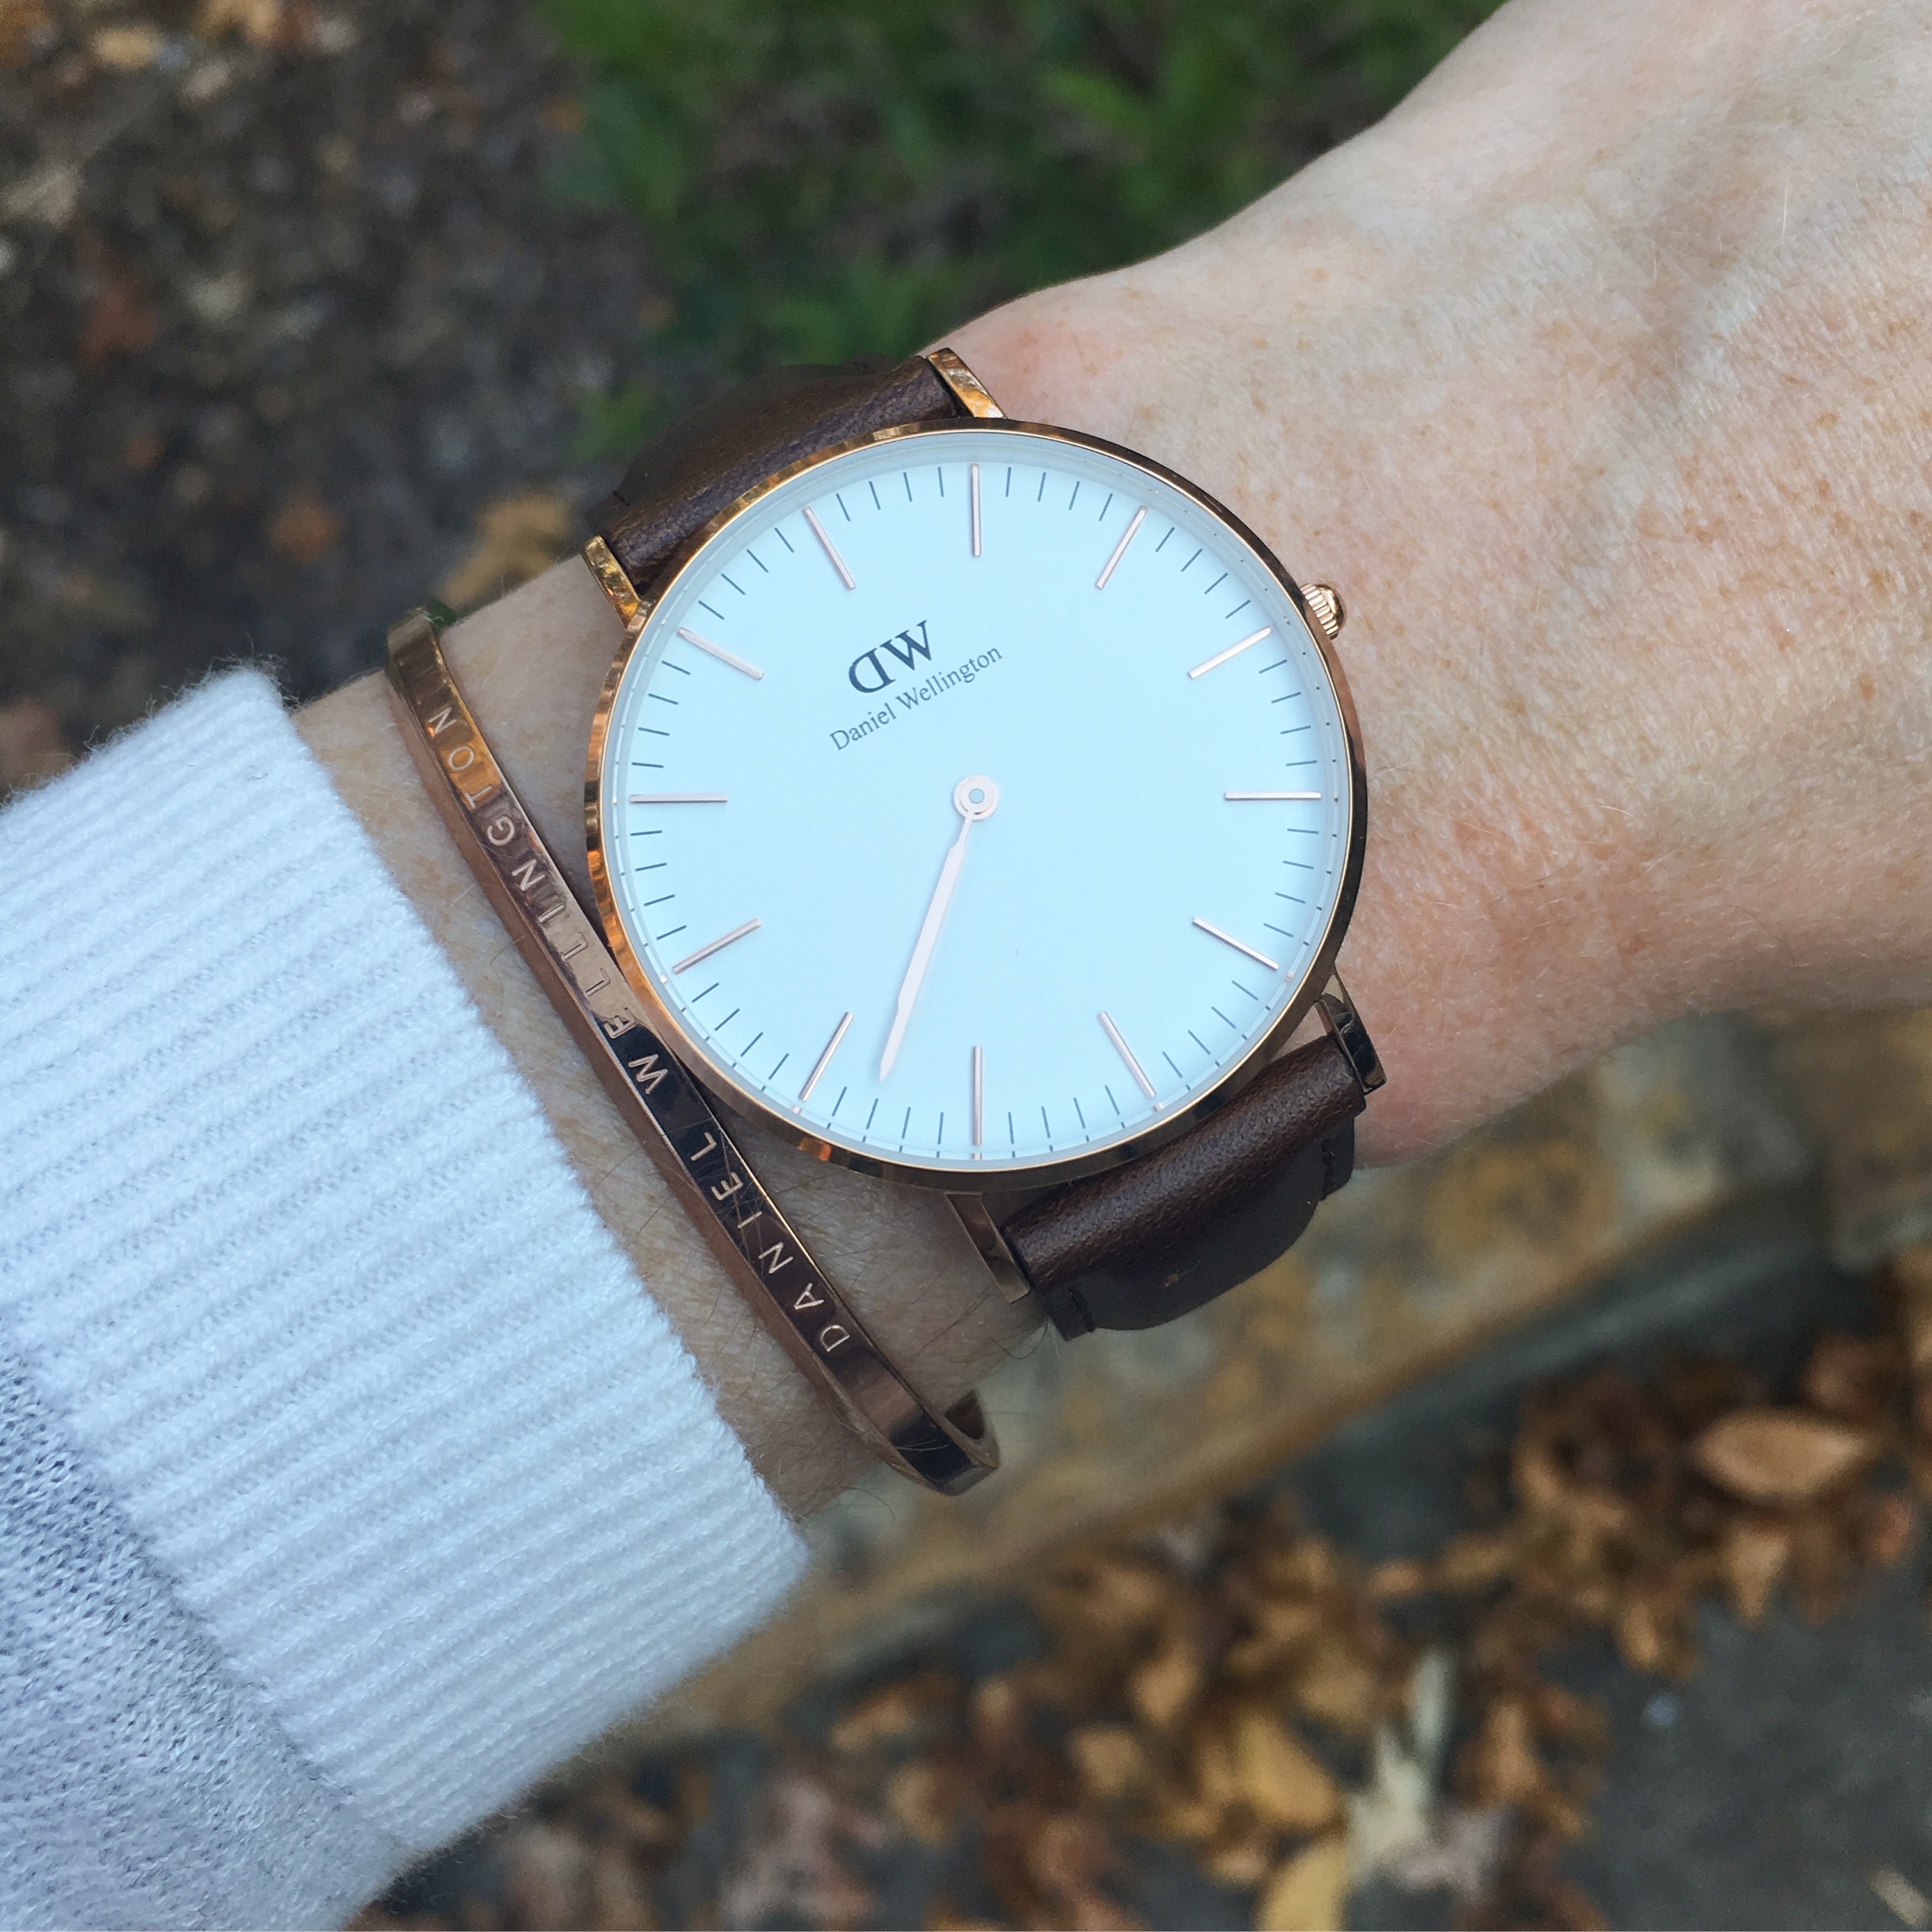 Perfect Holiday Gift with Daniel Wellington - Classy Yet Trendy